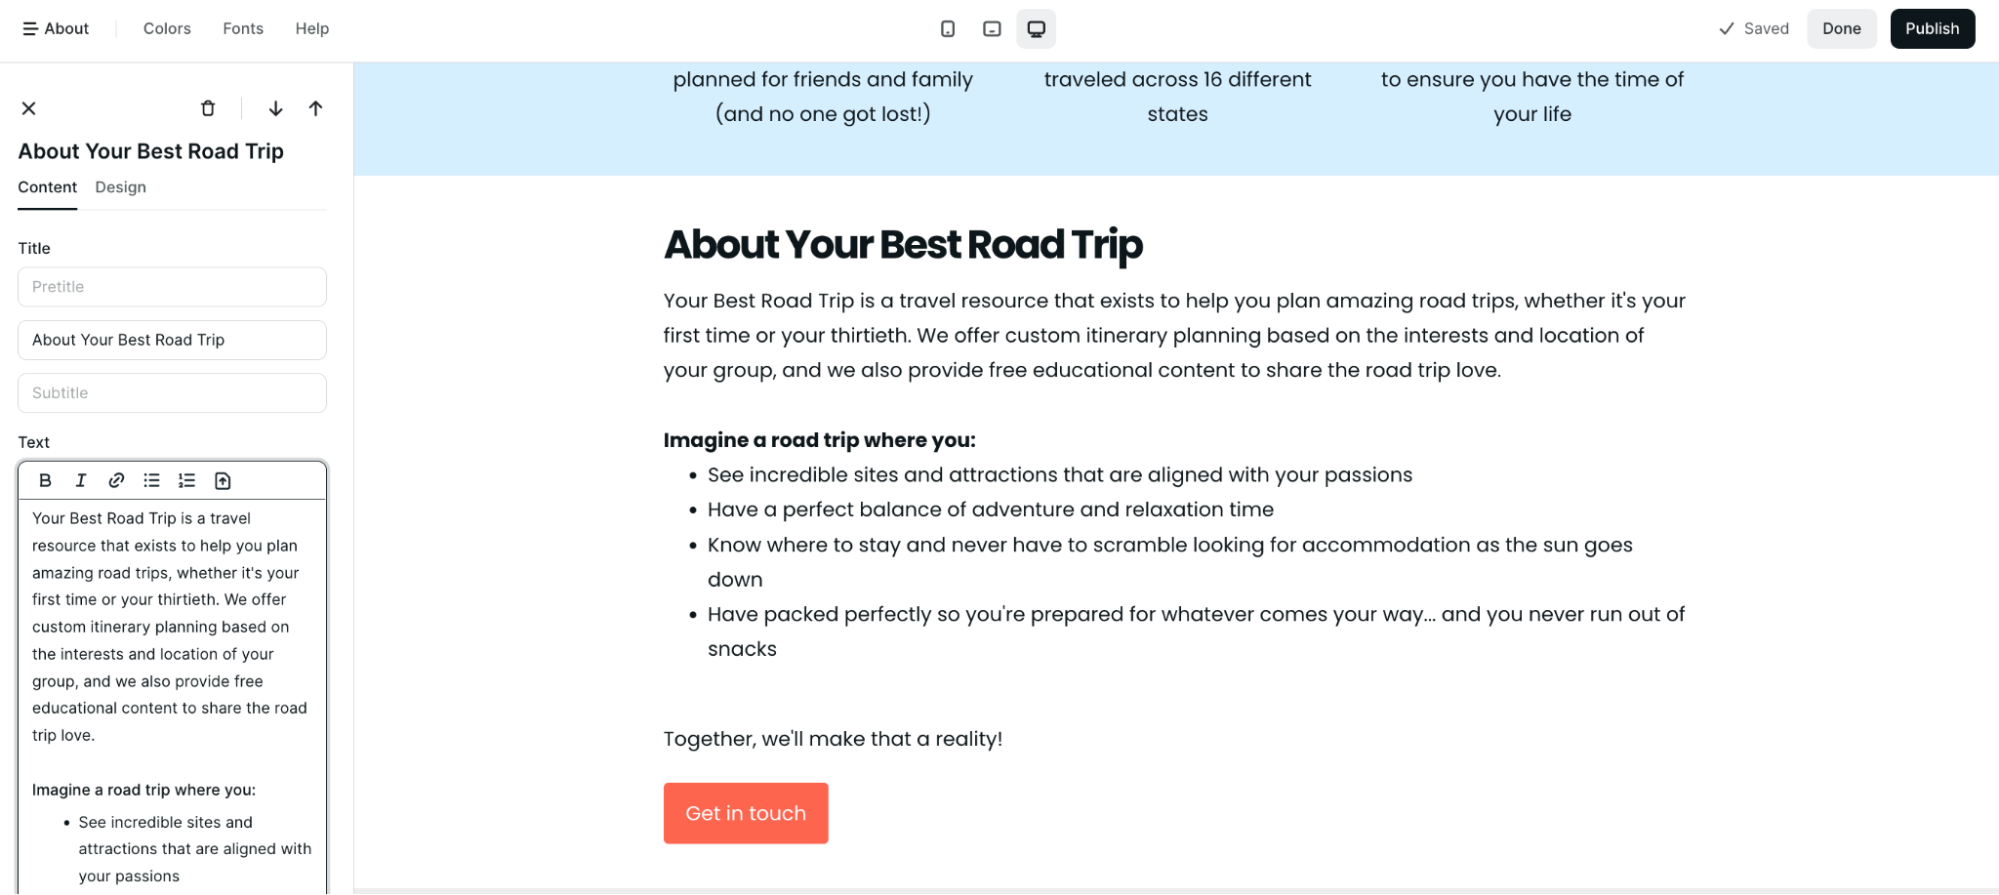 Website guide: Additional pages, About page card, About Your Best Road Trip